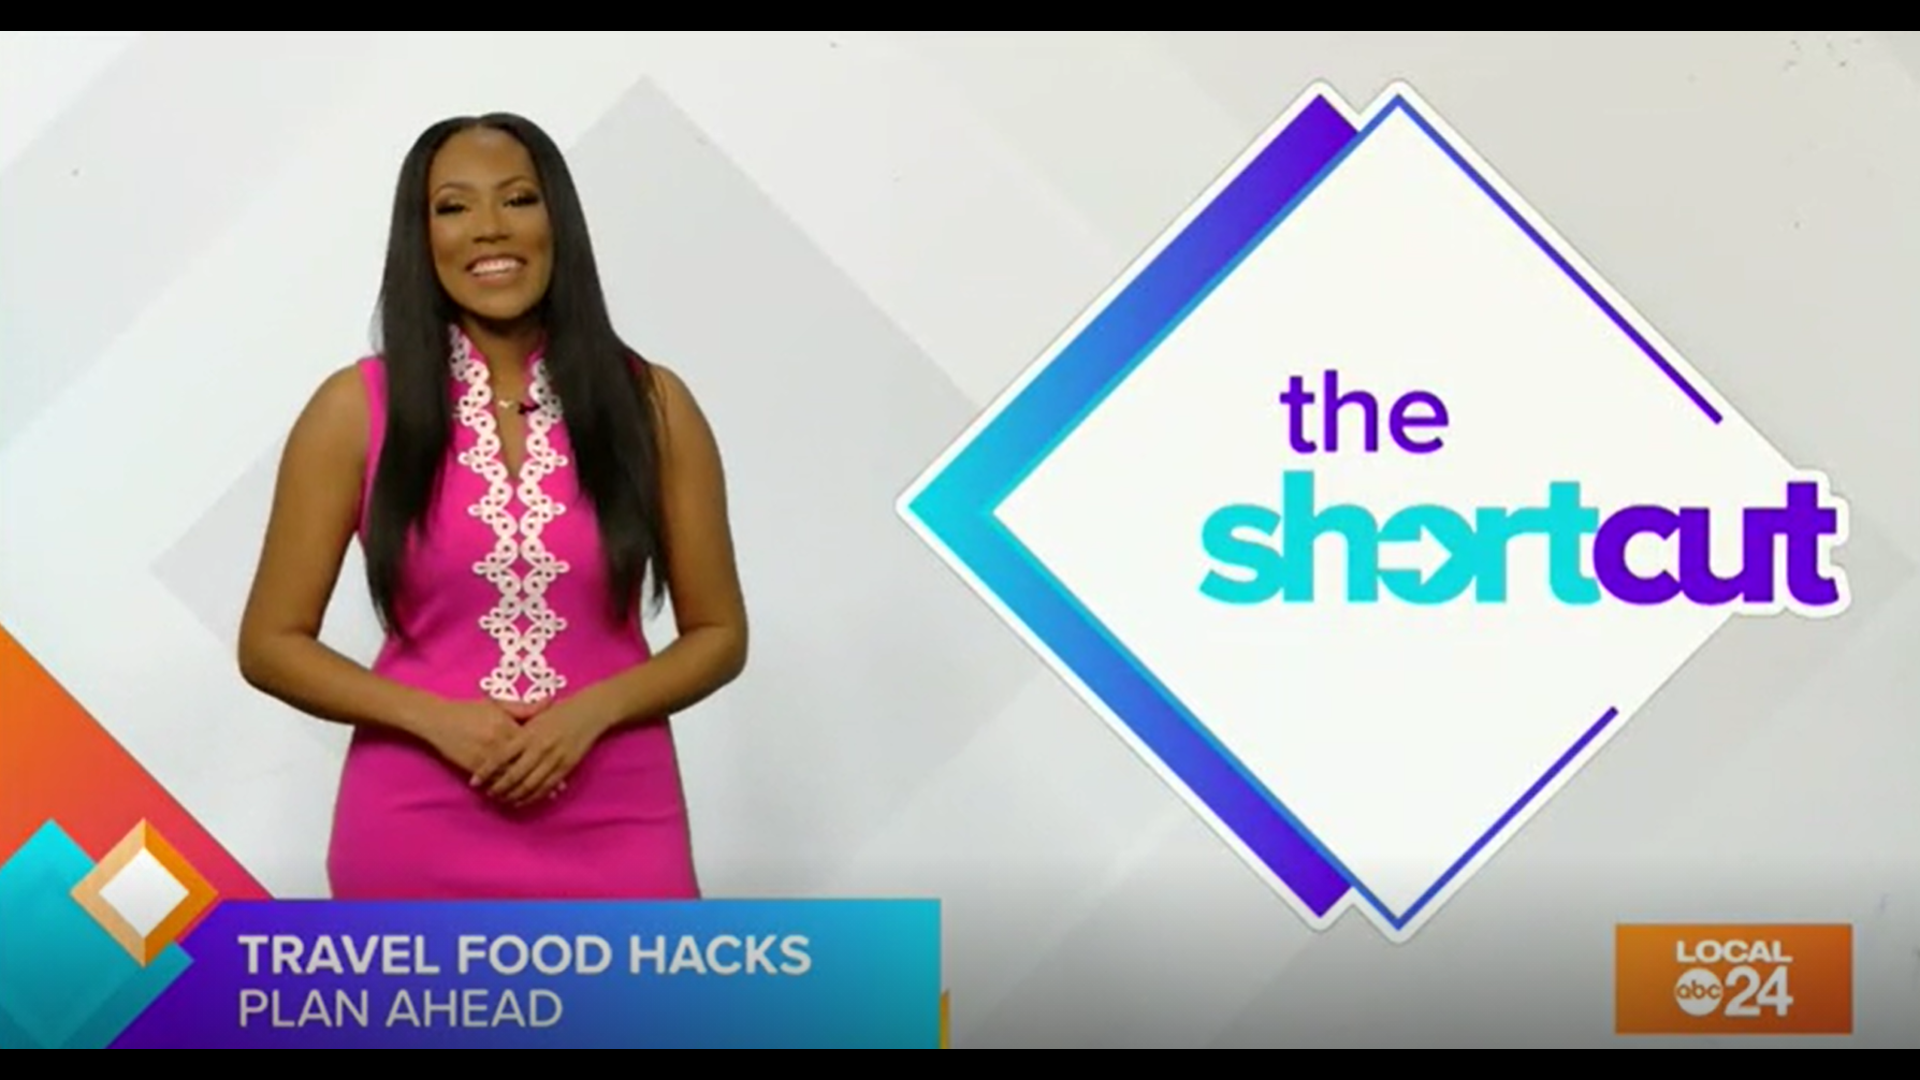 Use these ultimate food hacks to stay fit and healthy during your next vacation! Starring Sydney Neely on The Shortcut!